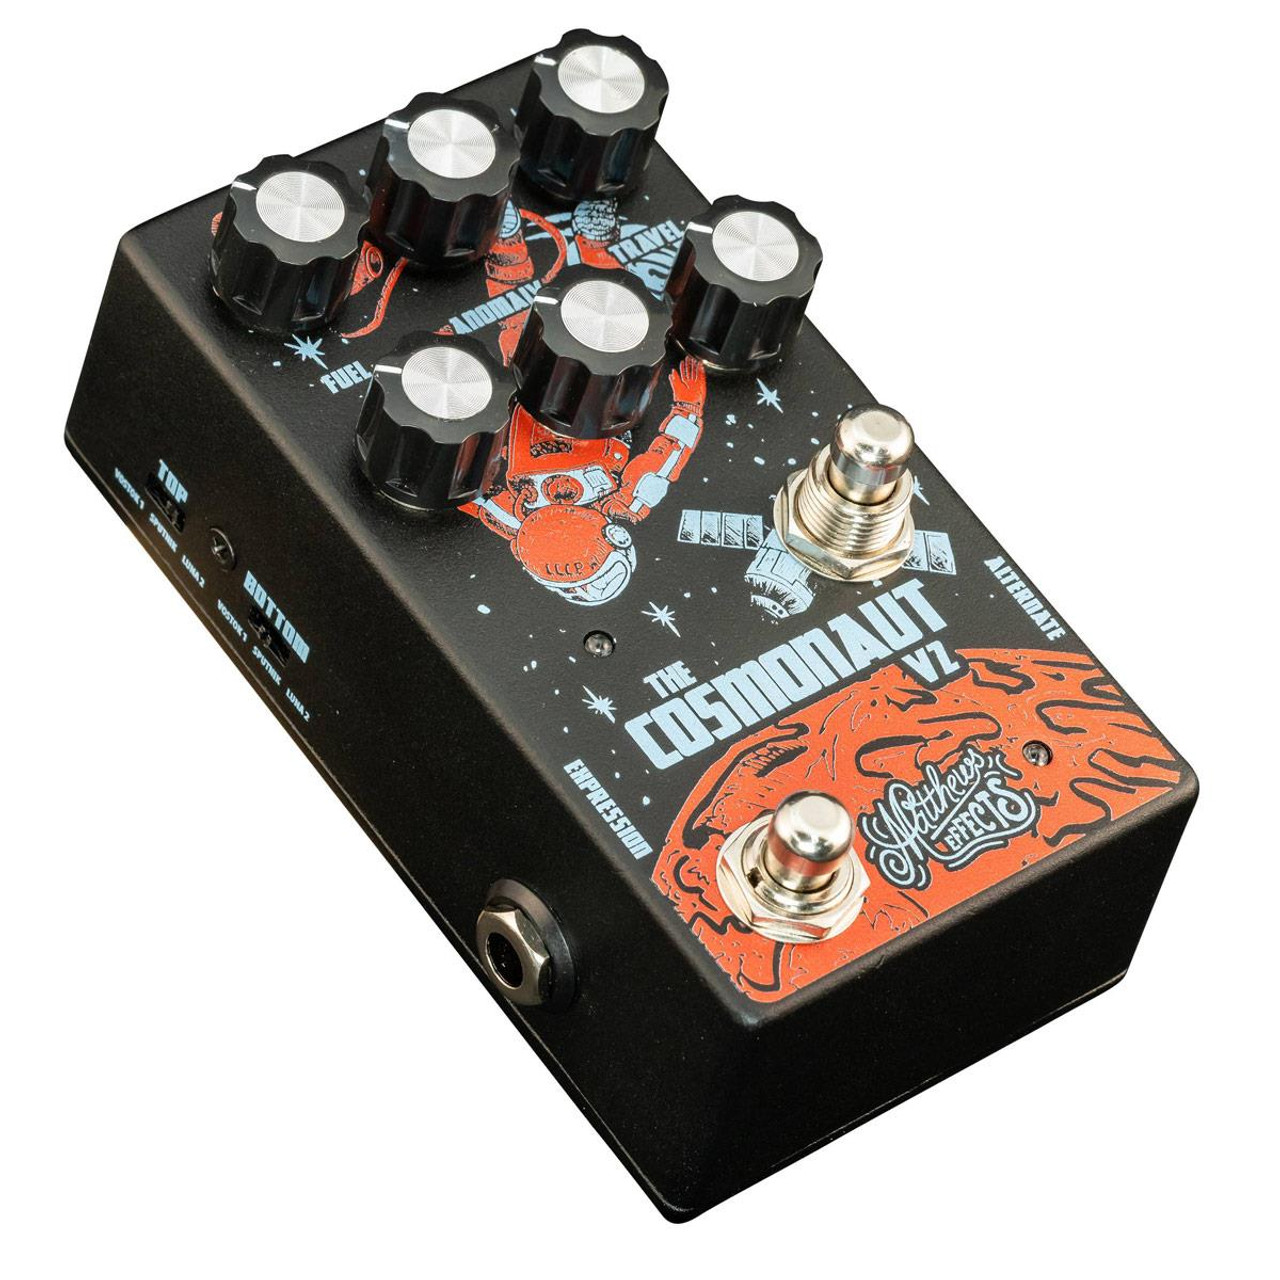 Matthews Effects Cosmonaut v2 Modulated Reverb / Delay pedal